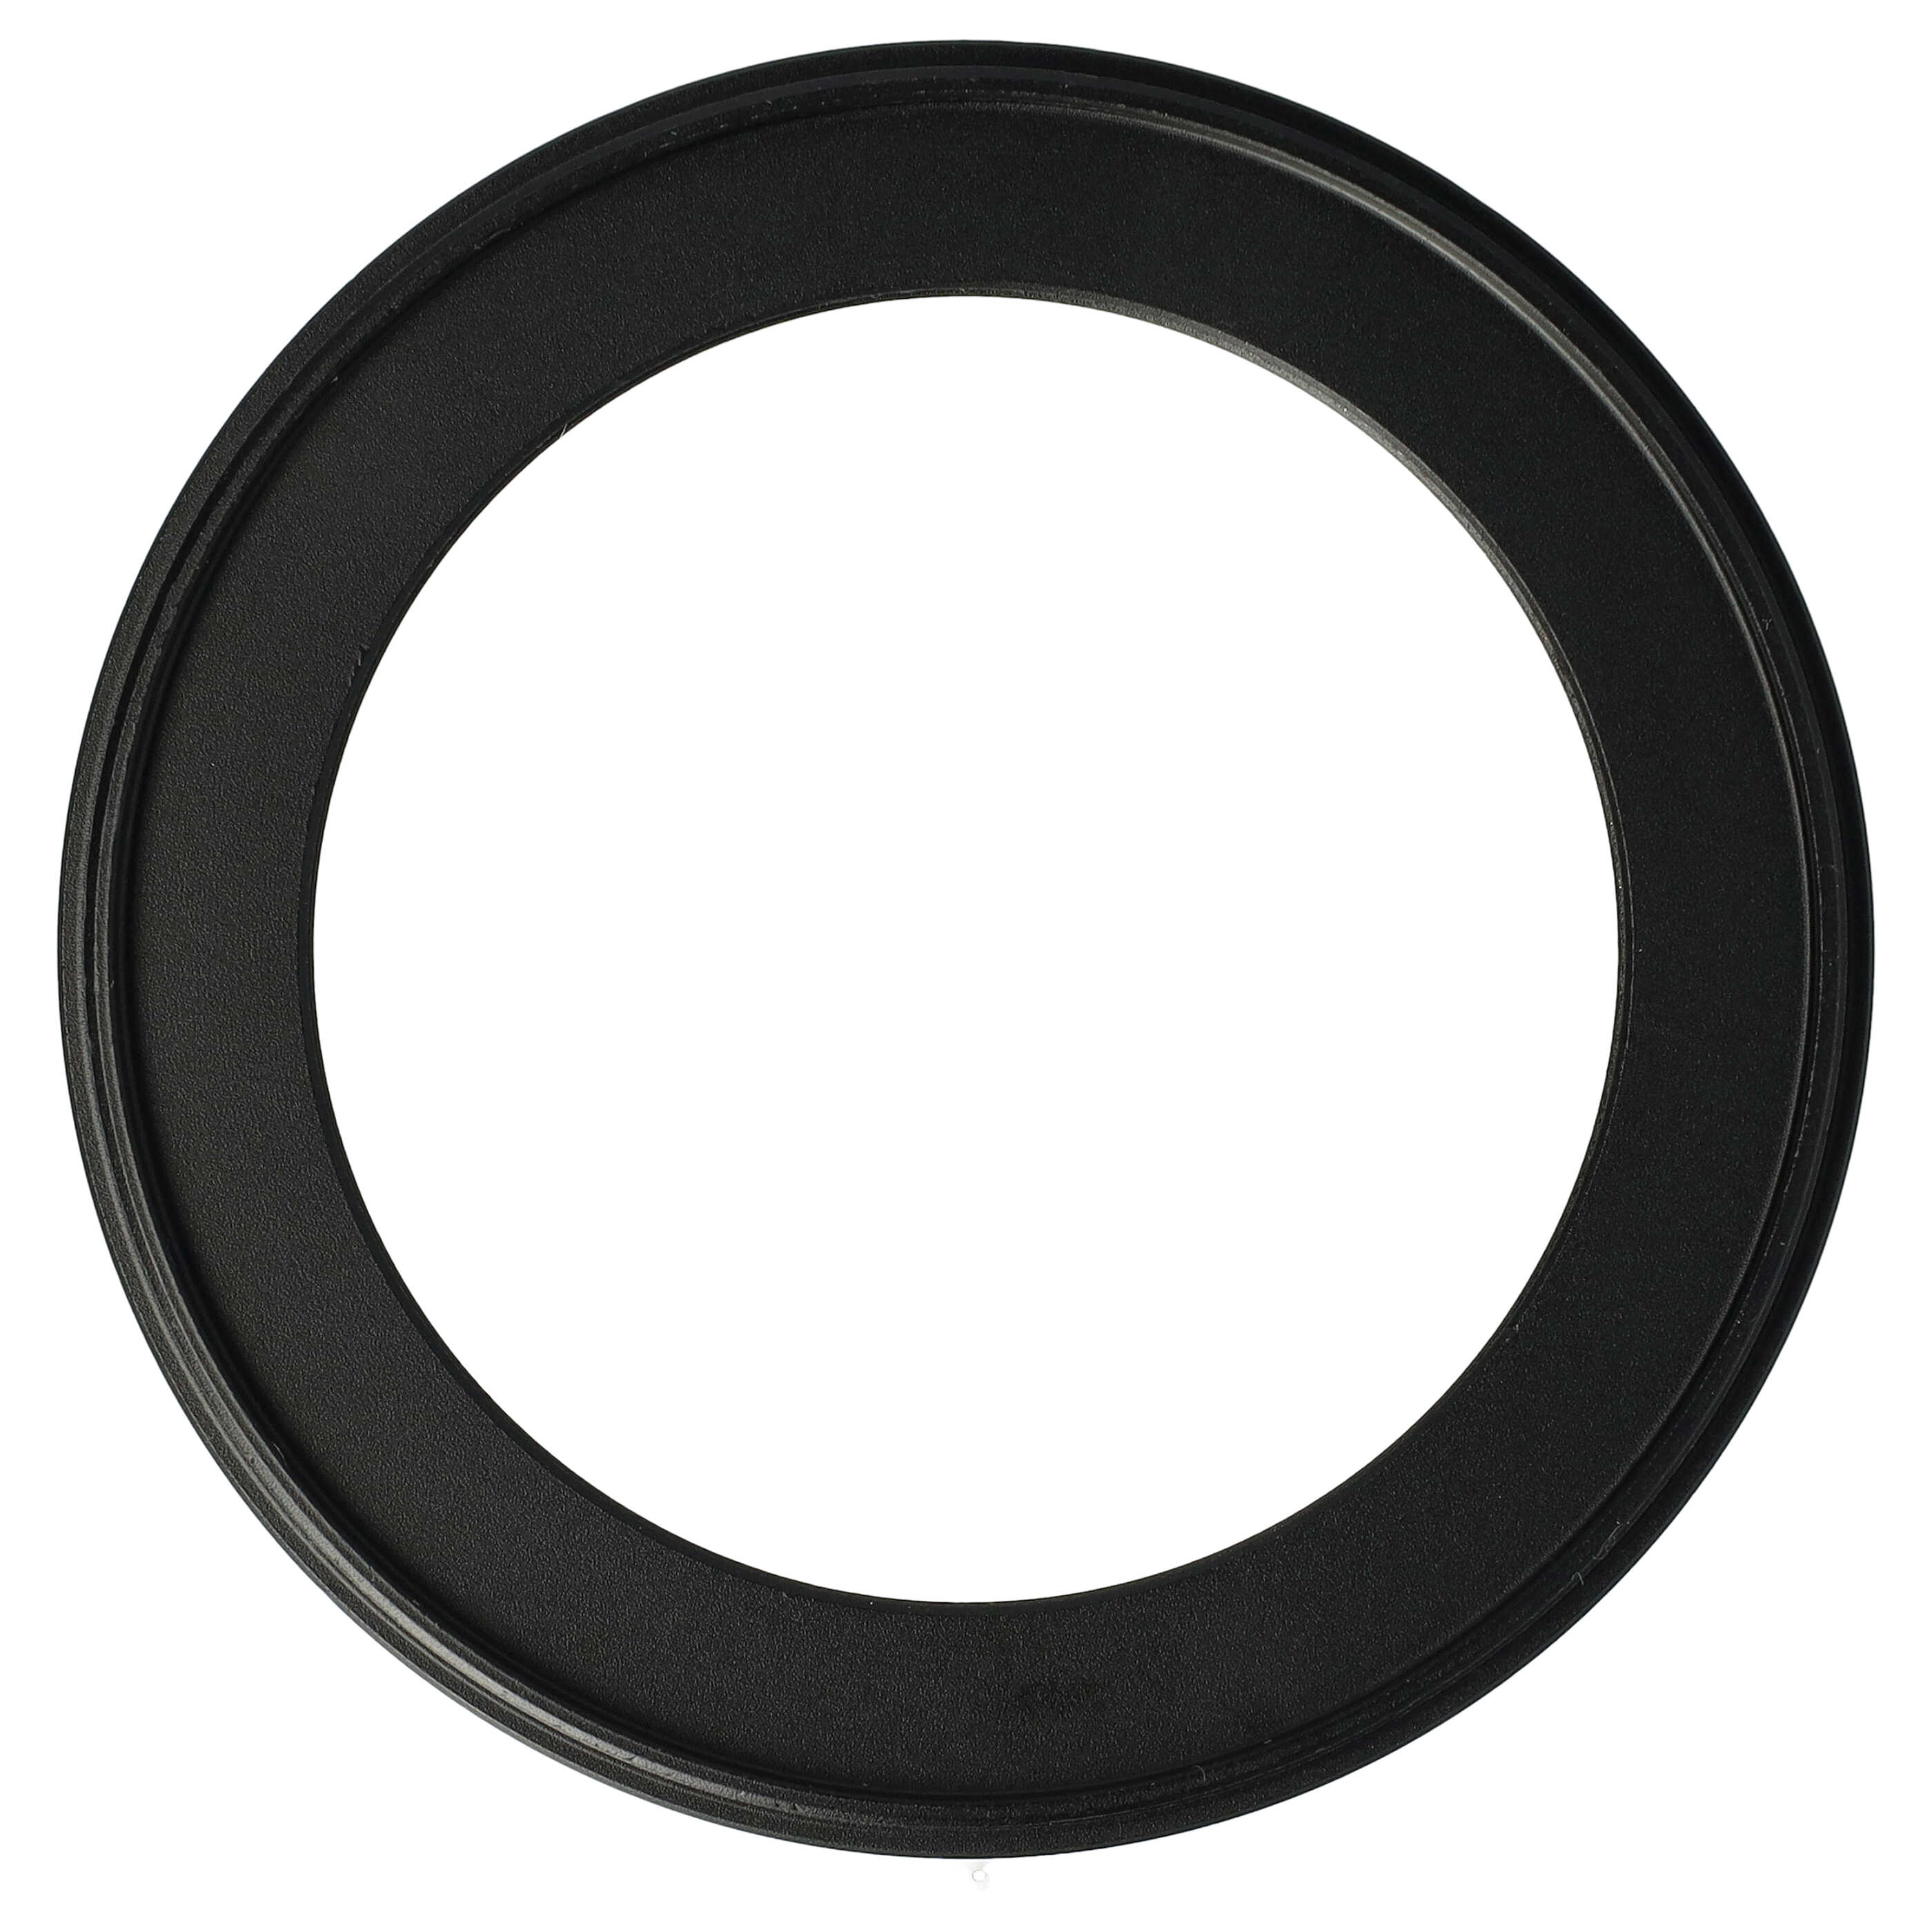 Step-Down Ring Adapter from 77 mm to 58 mm suitable for Camera Lens - Filter Adapter, metal